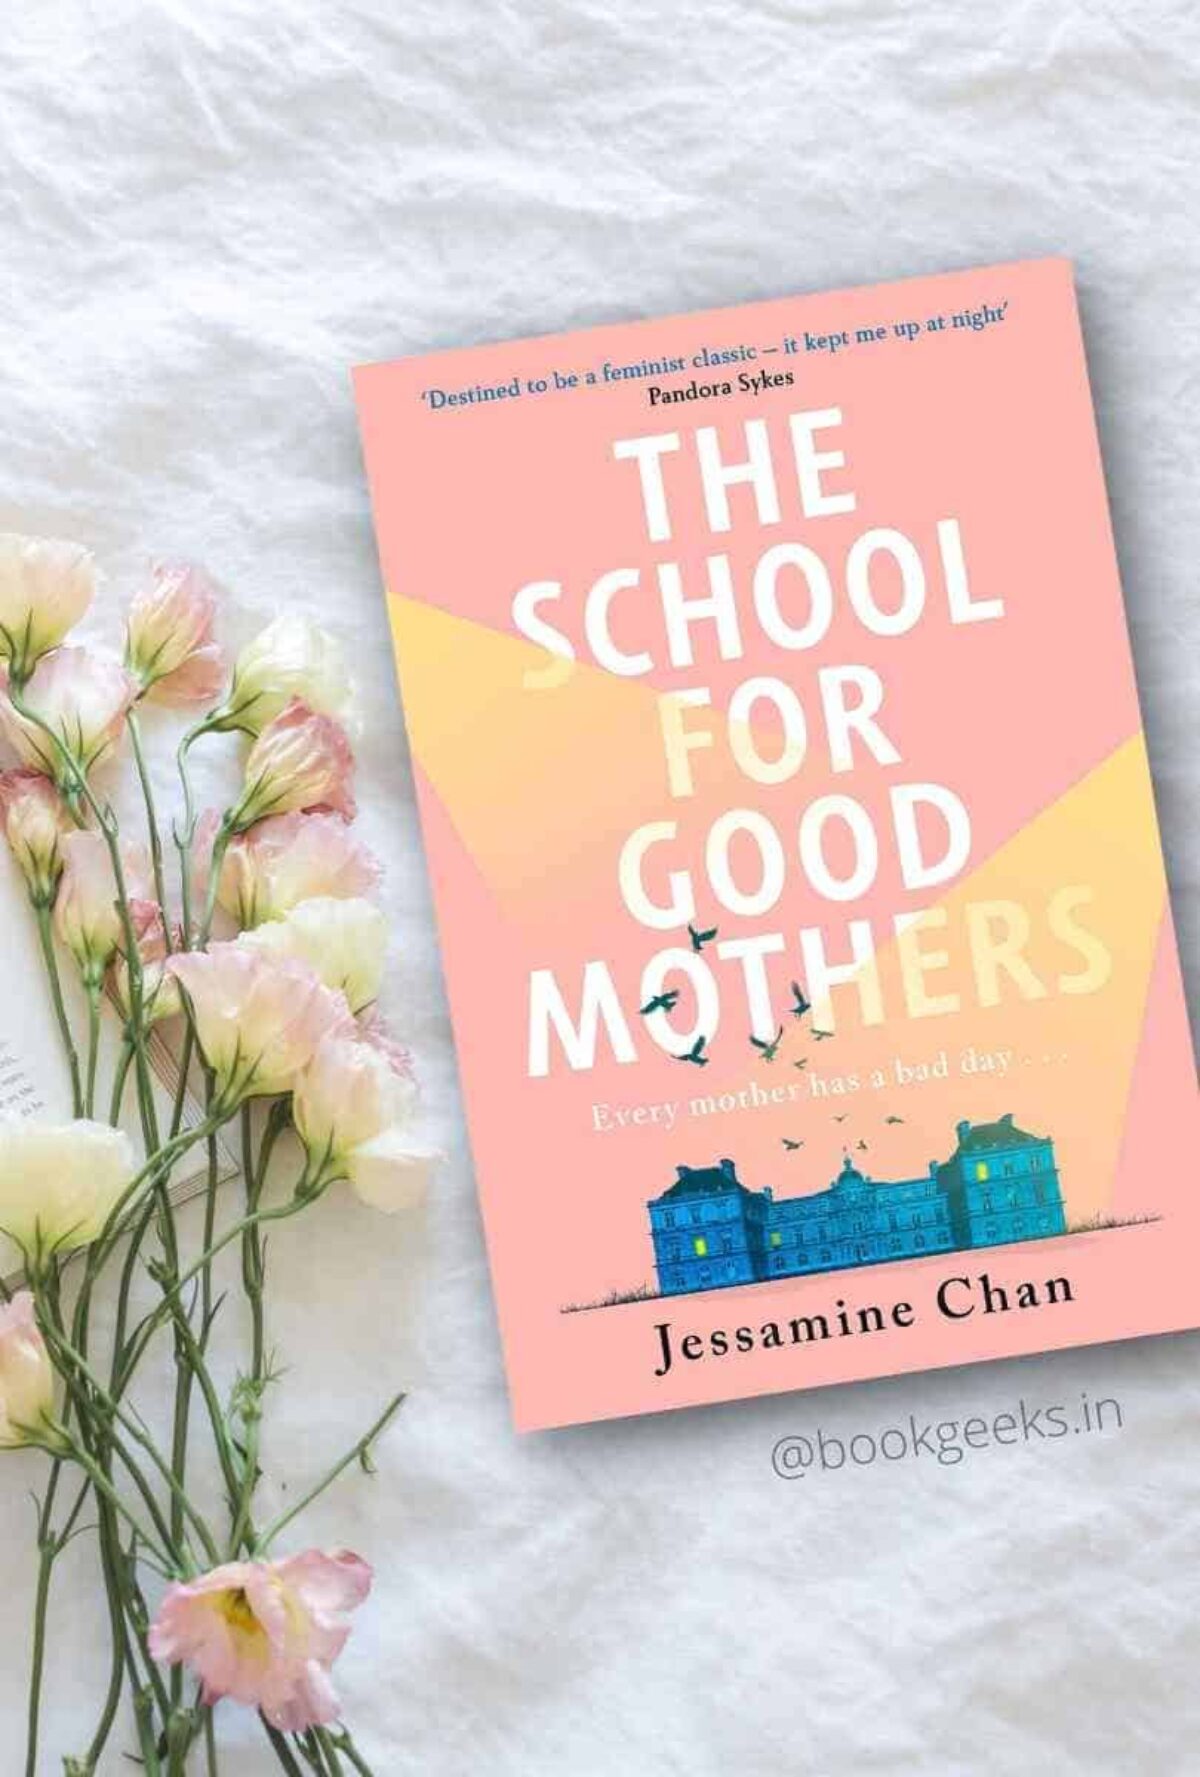 The School for Good Mothers by Jessamine Chan, Paperback